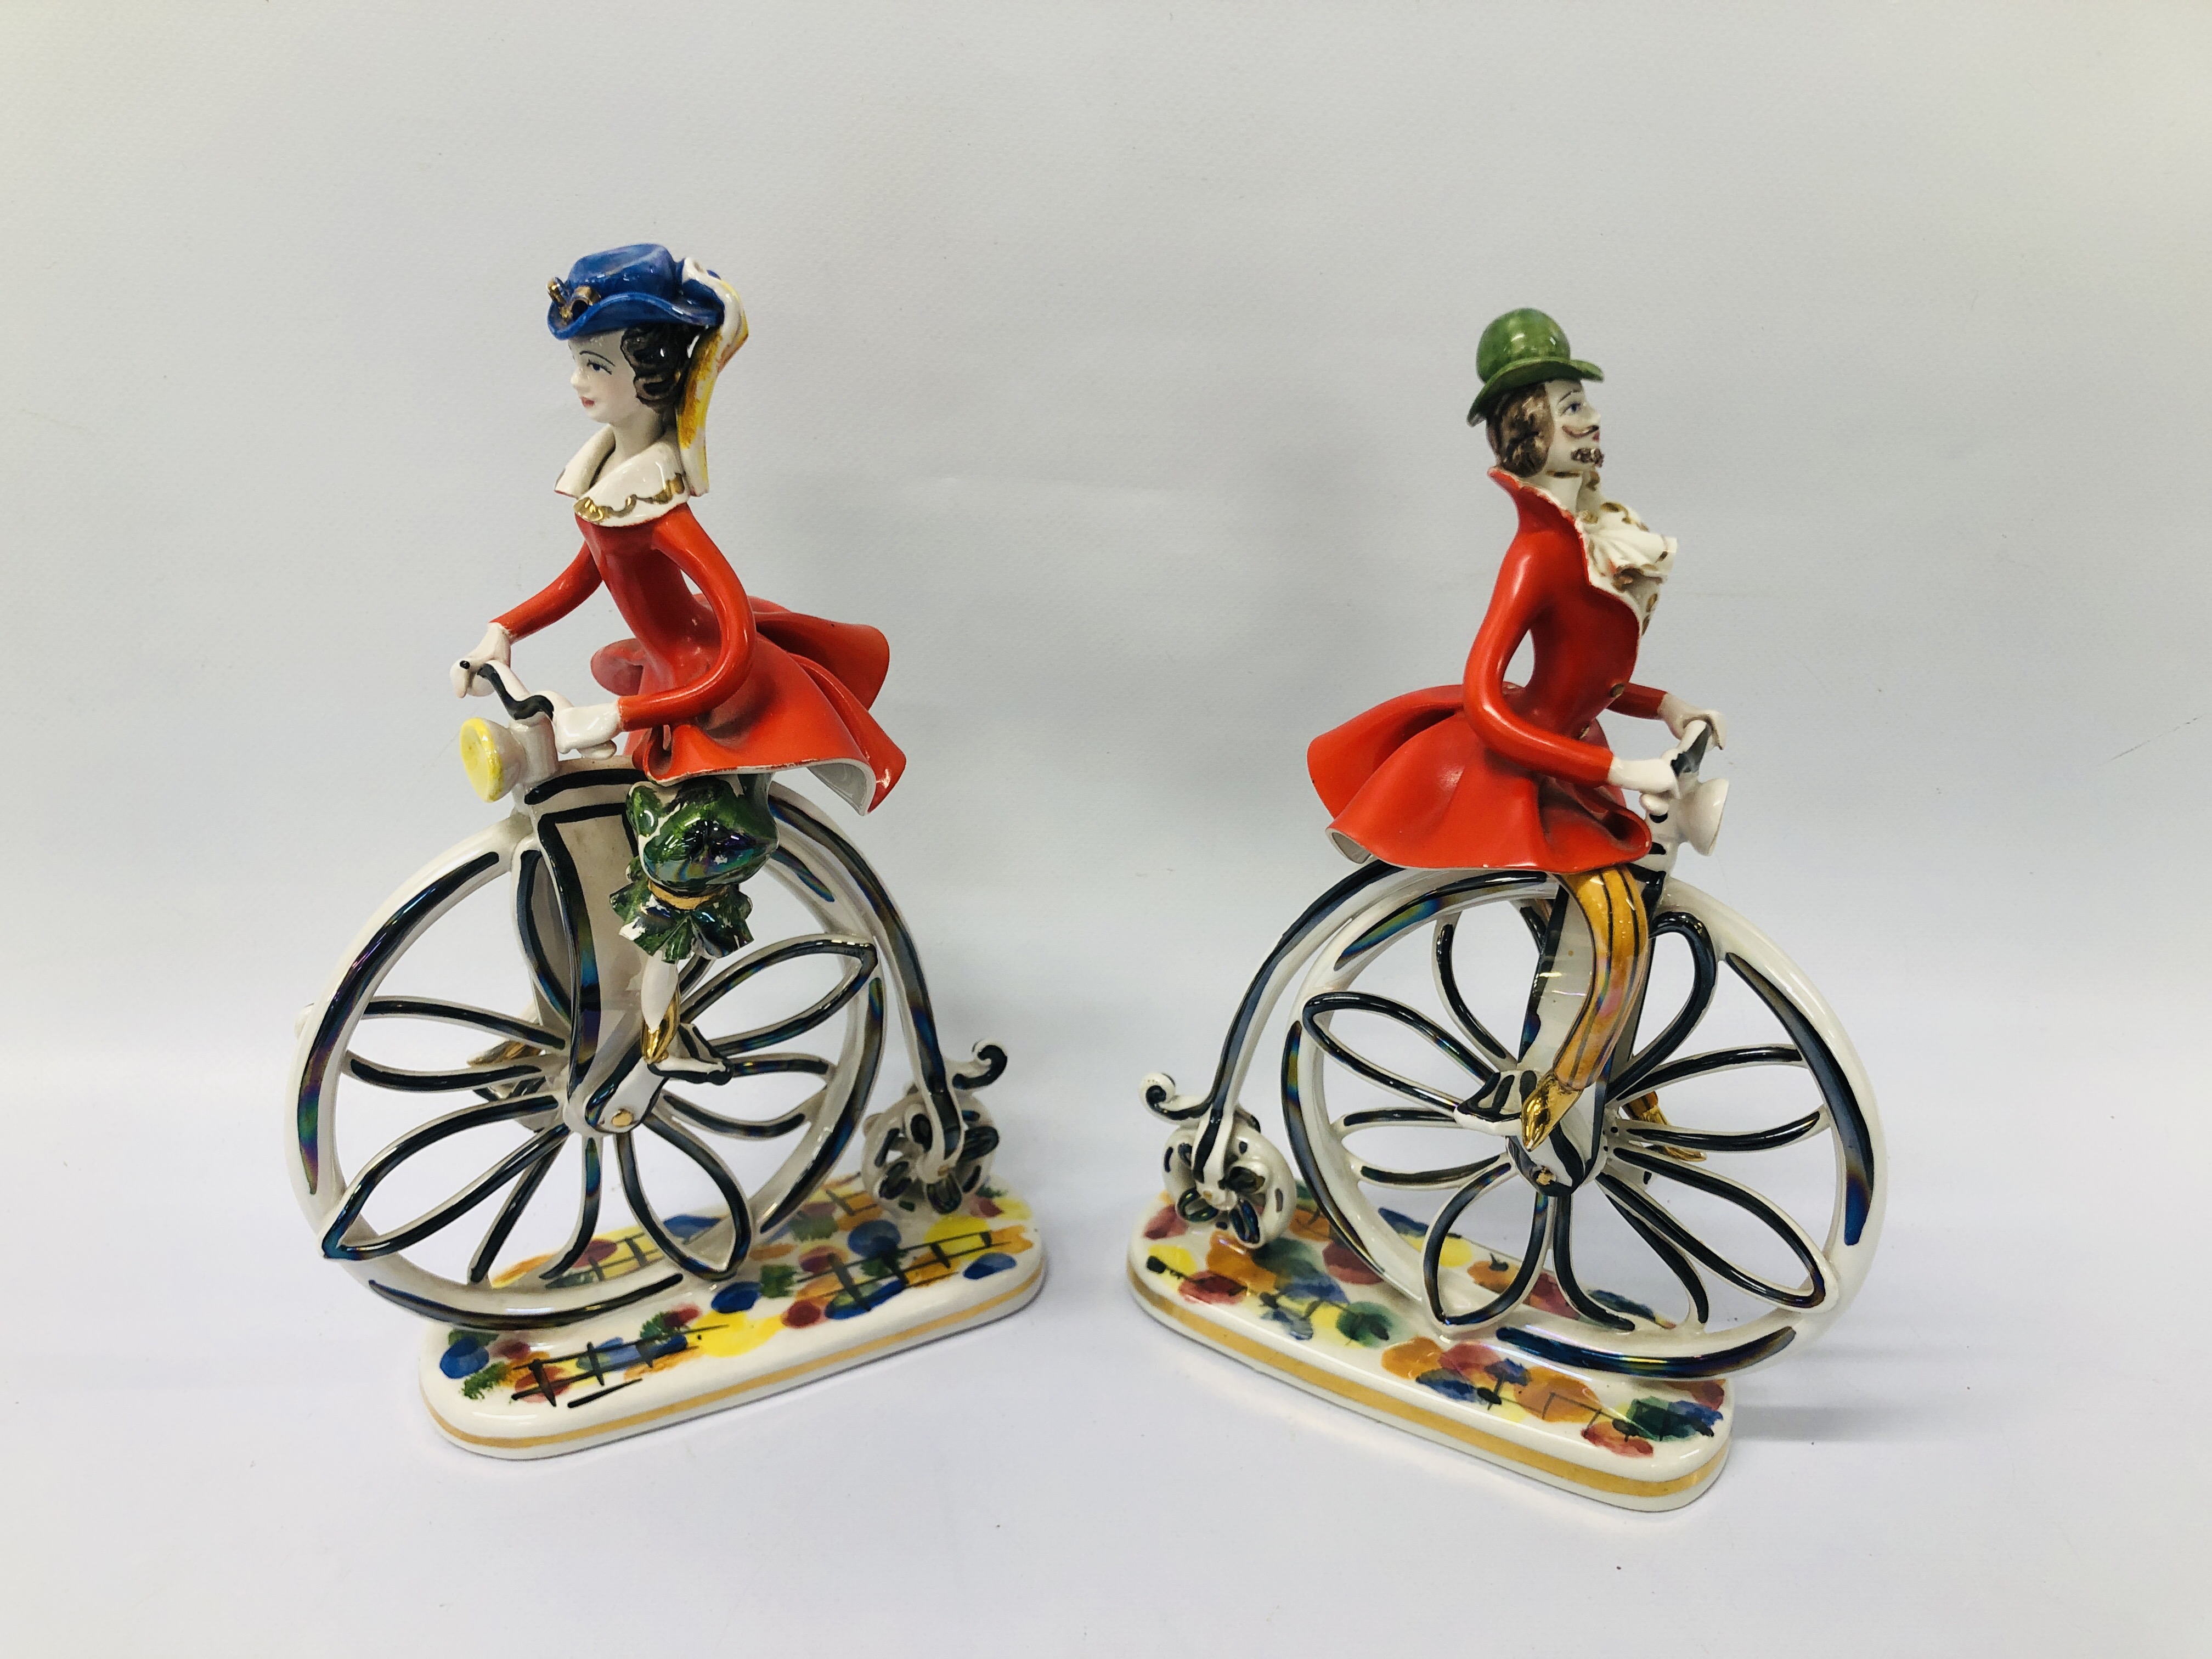 PAIR OF ITALIAN ORNAMENTS "LADY'S UPON PENNY FARTHINGS" H 24CM ALONG WITH A FIGURED CABINET - Image 6 of 10